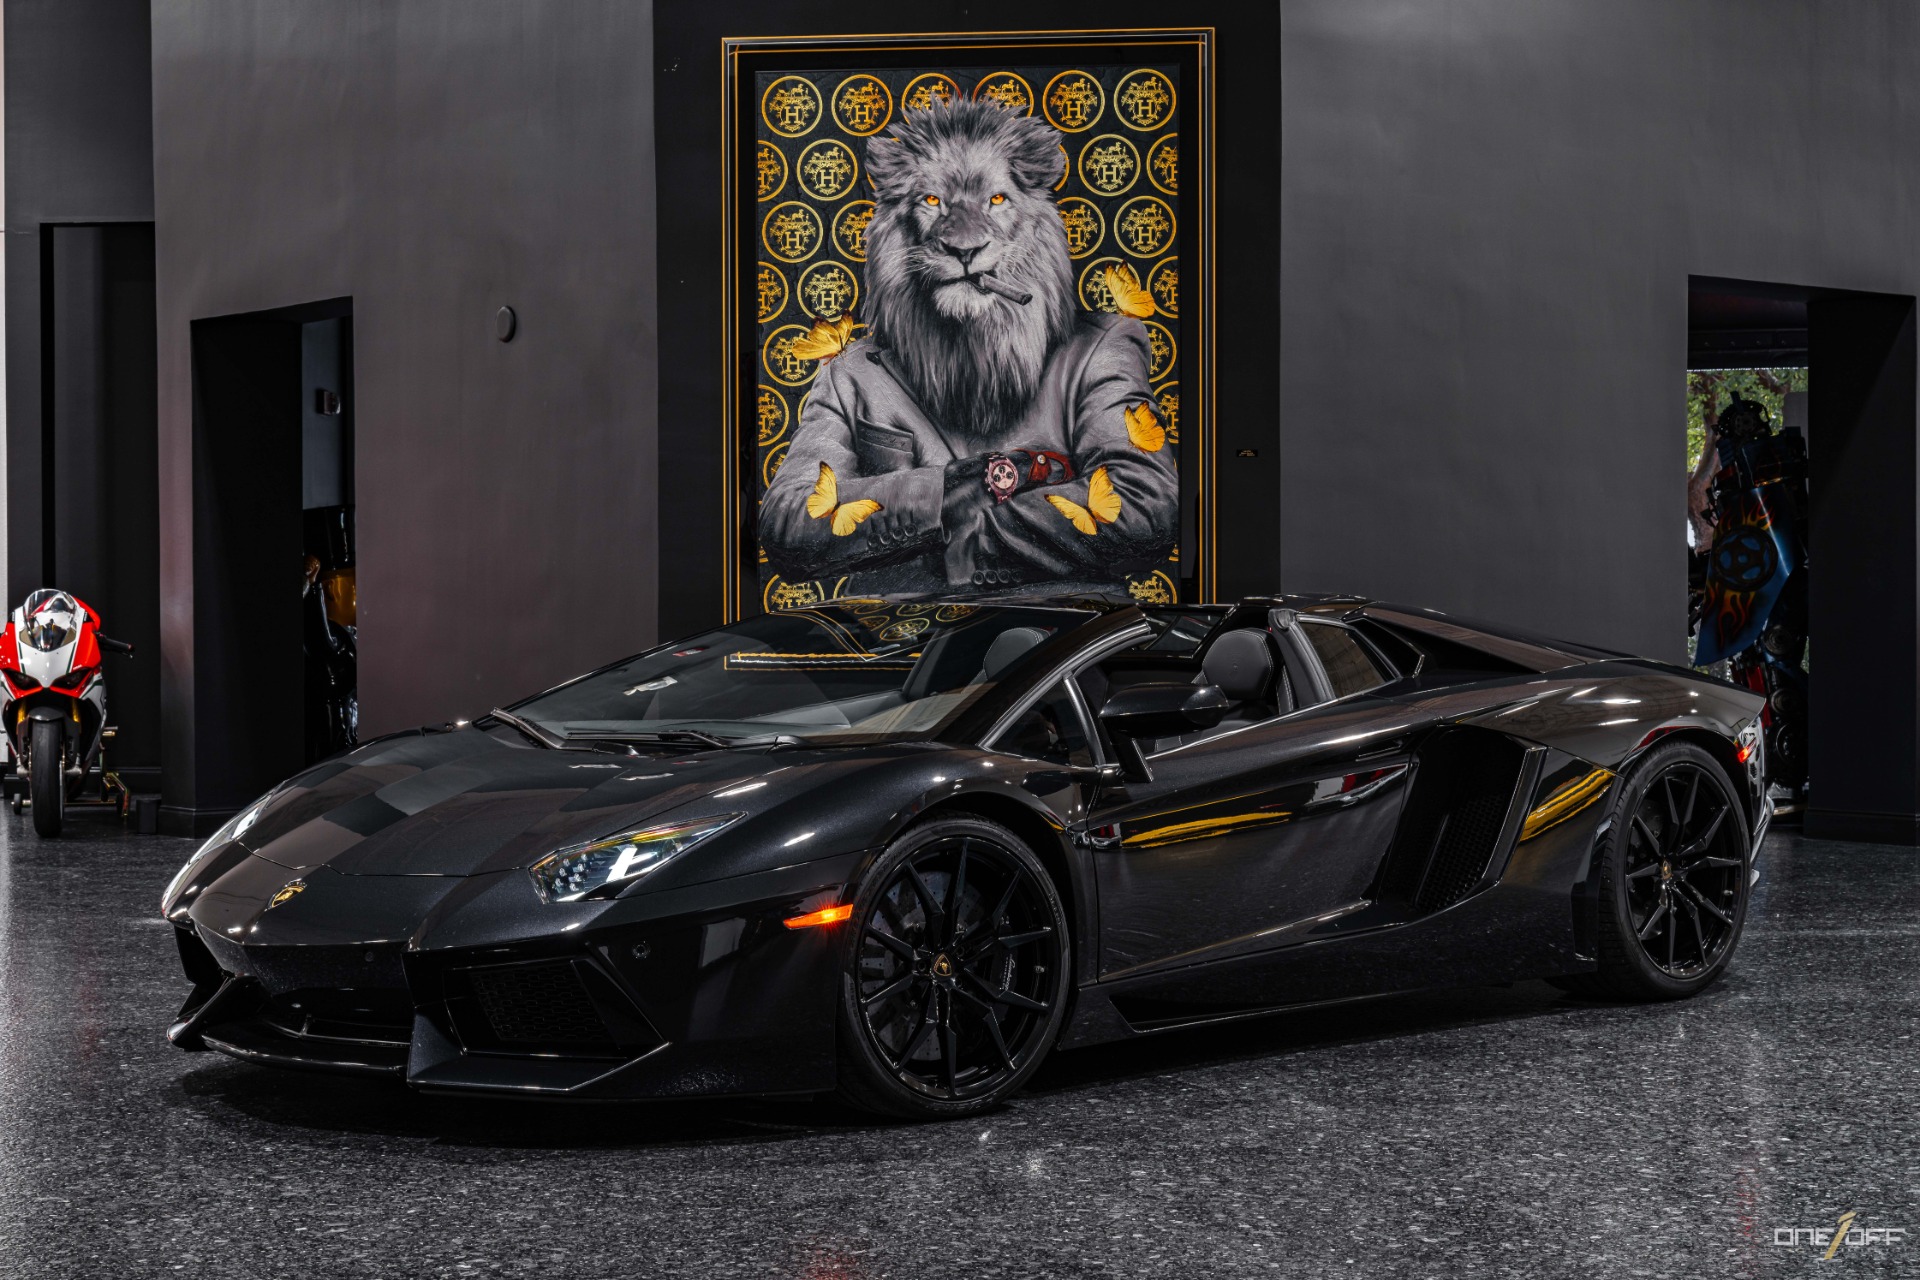 Used 2014 Lamborghini Aventador LP 700-4 Roadster w/ Dione Forged Wheels,  Transparent Engine Cover Carbon For Sale ($369,000) Exotics Hunter  Stock #A02455